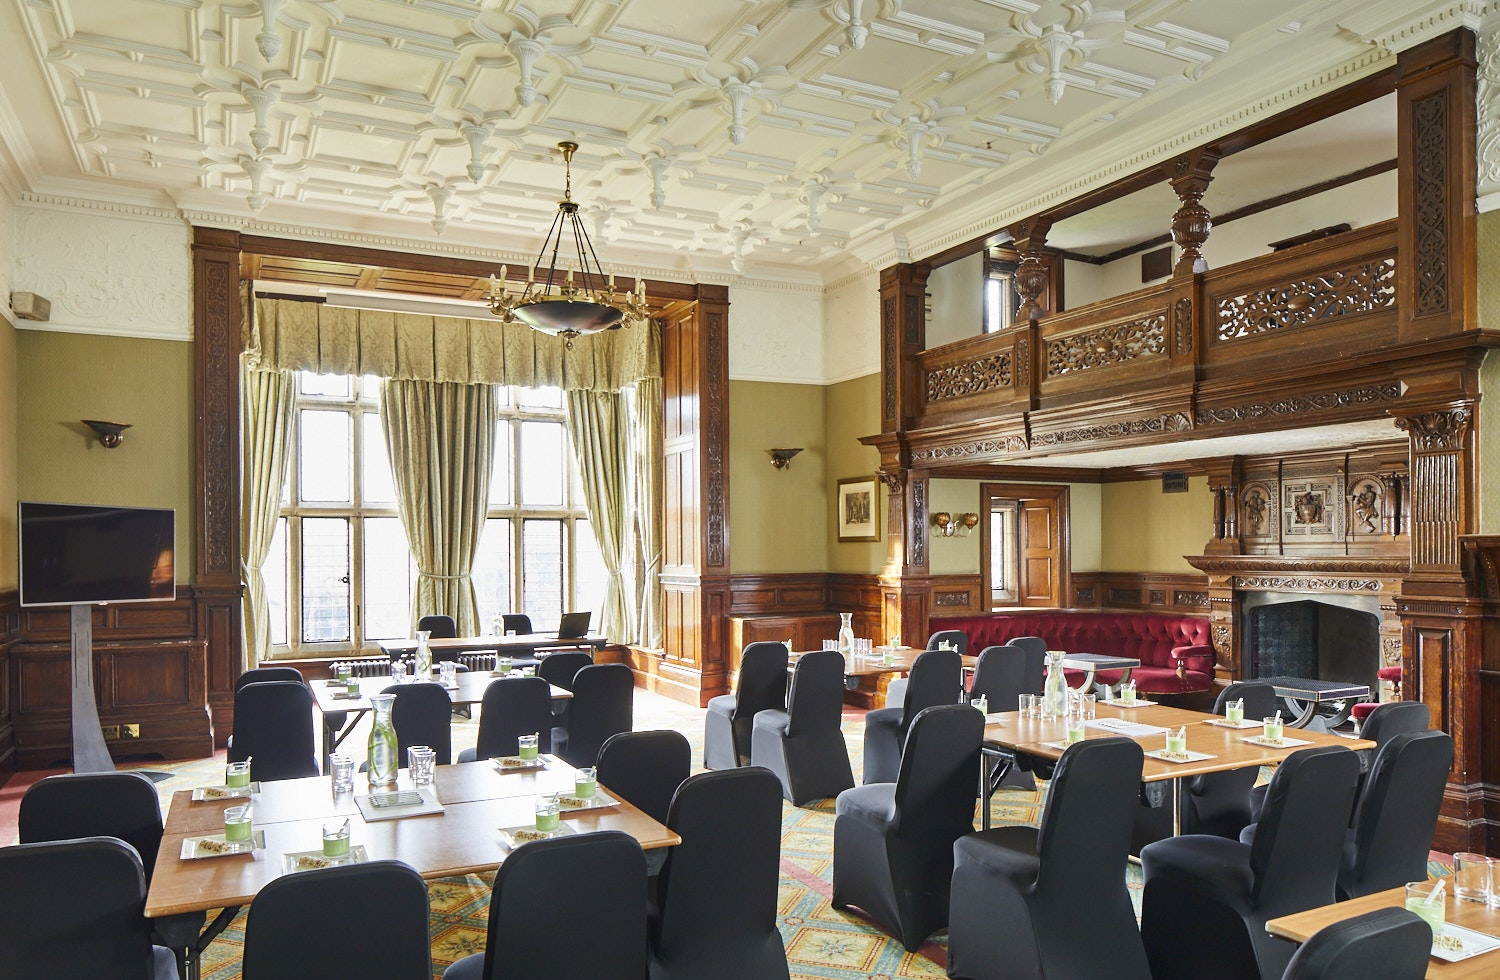 Delta Hotels by Marriott Breadsall Priory Country Club - Haslam Room image 1